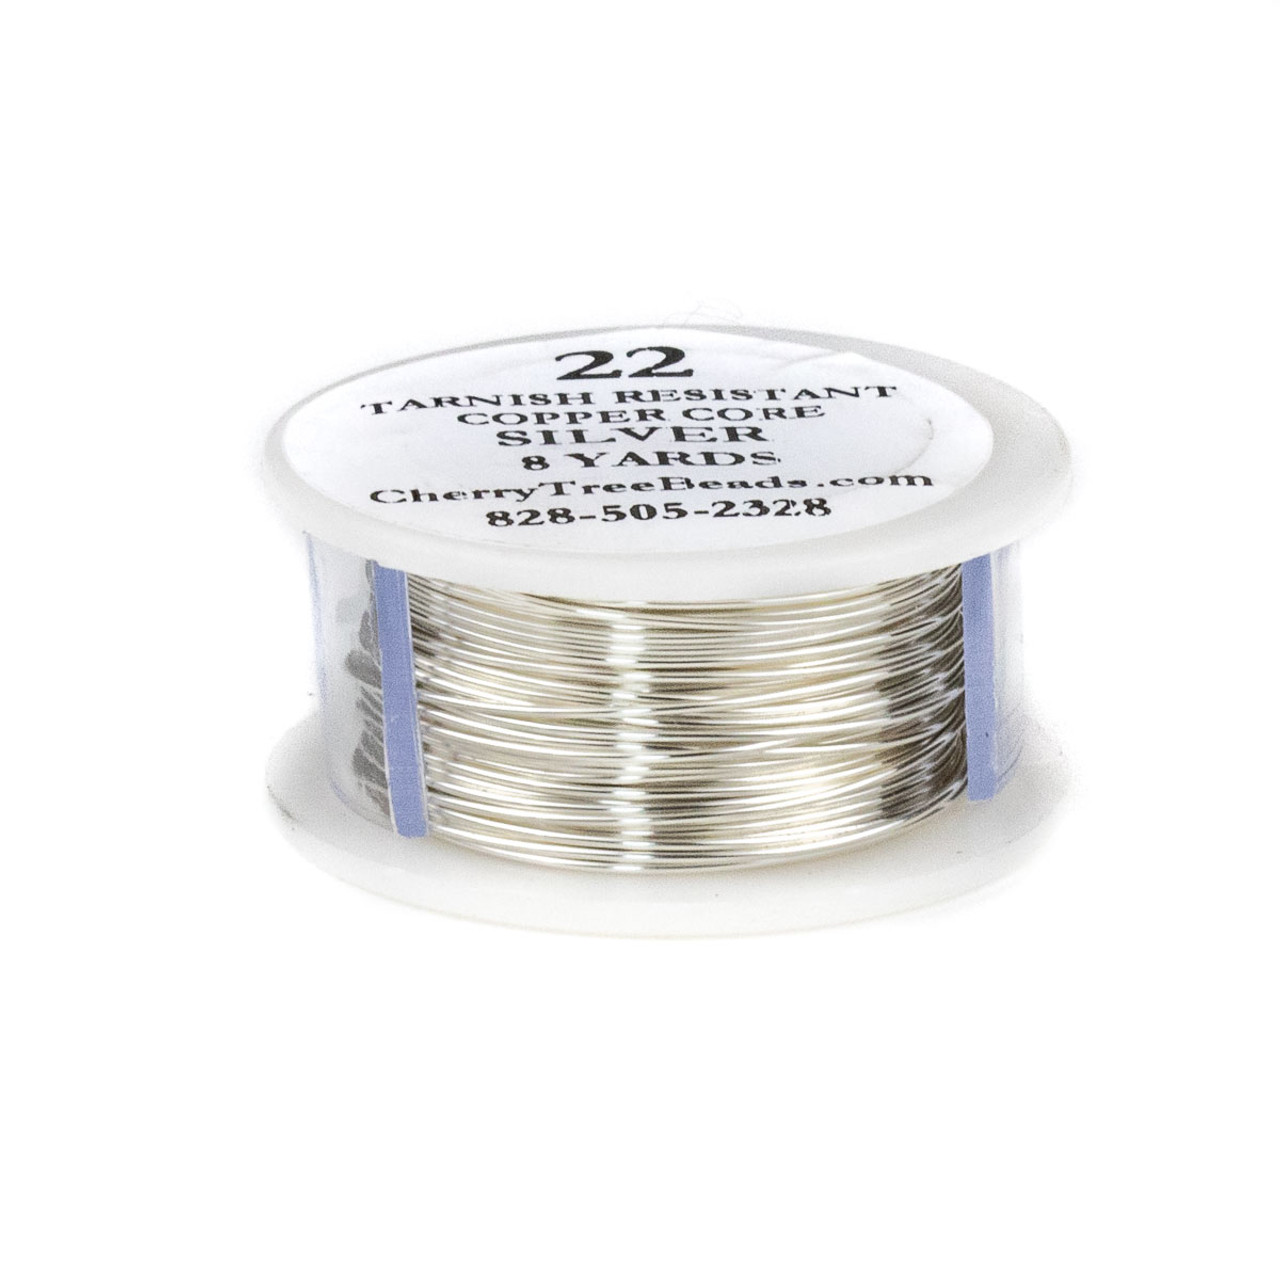 22 Gauge Coated Tarnish Resistant Fine Silver Plated Copper Wire